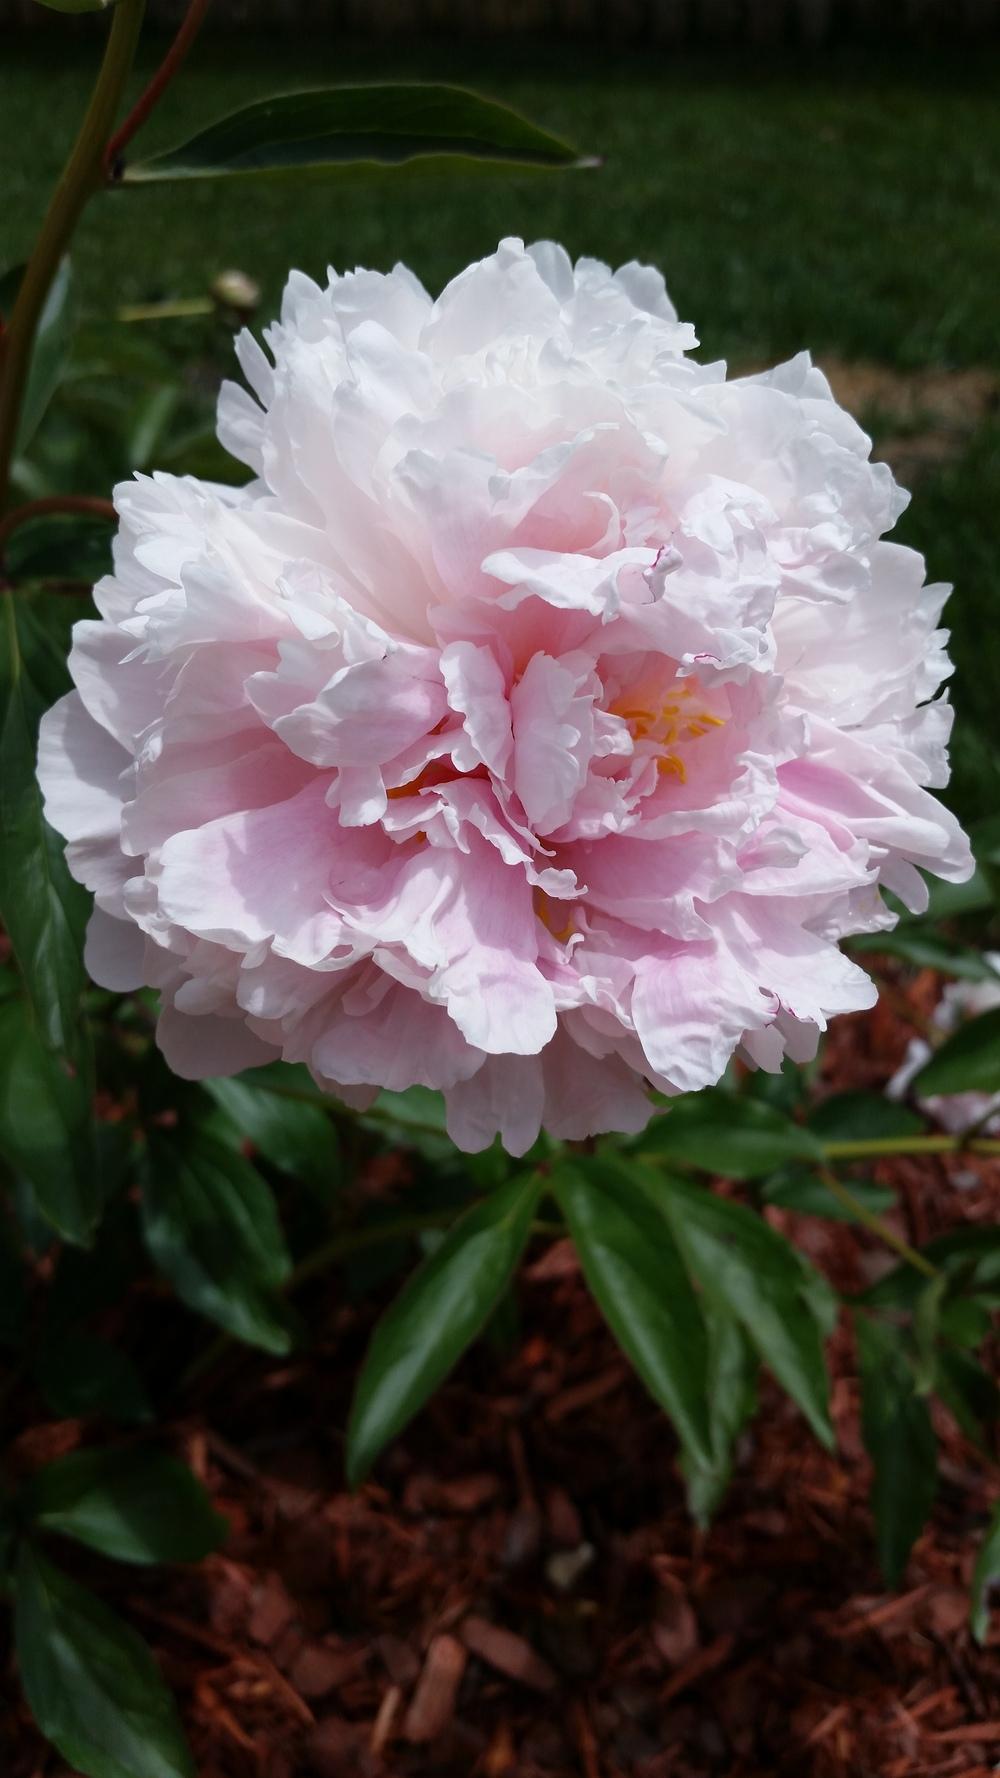 Photo of Peonies (Paeonia) uploaded by Bschmuck